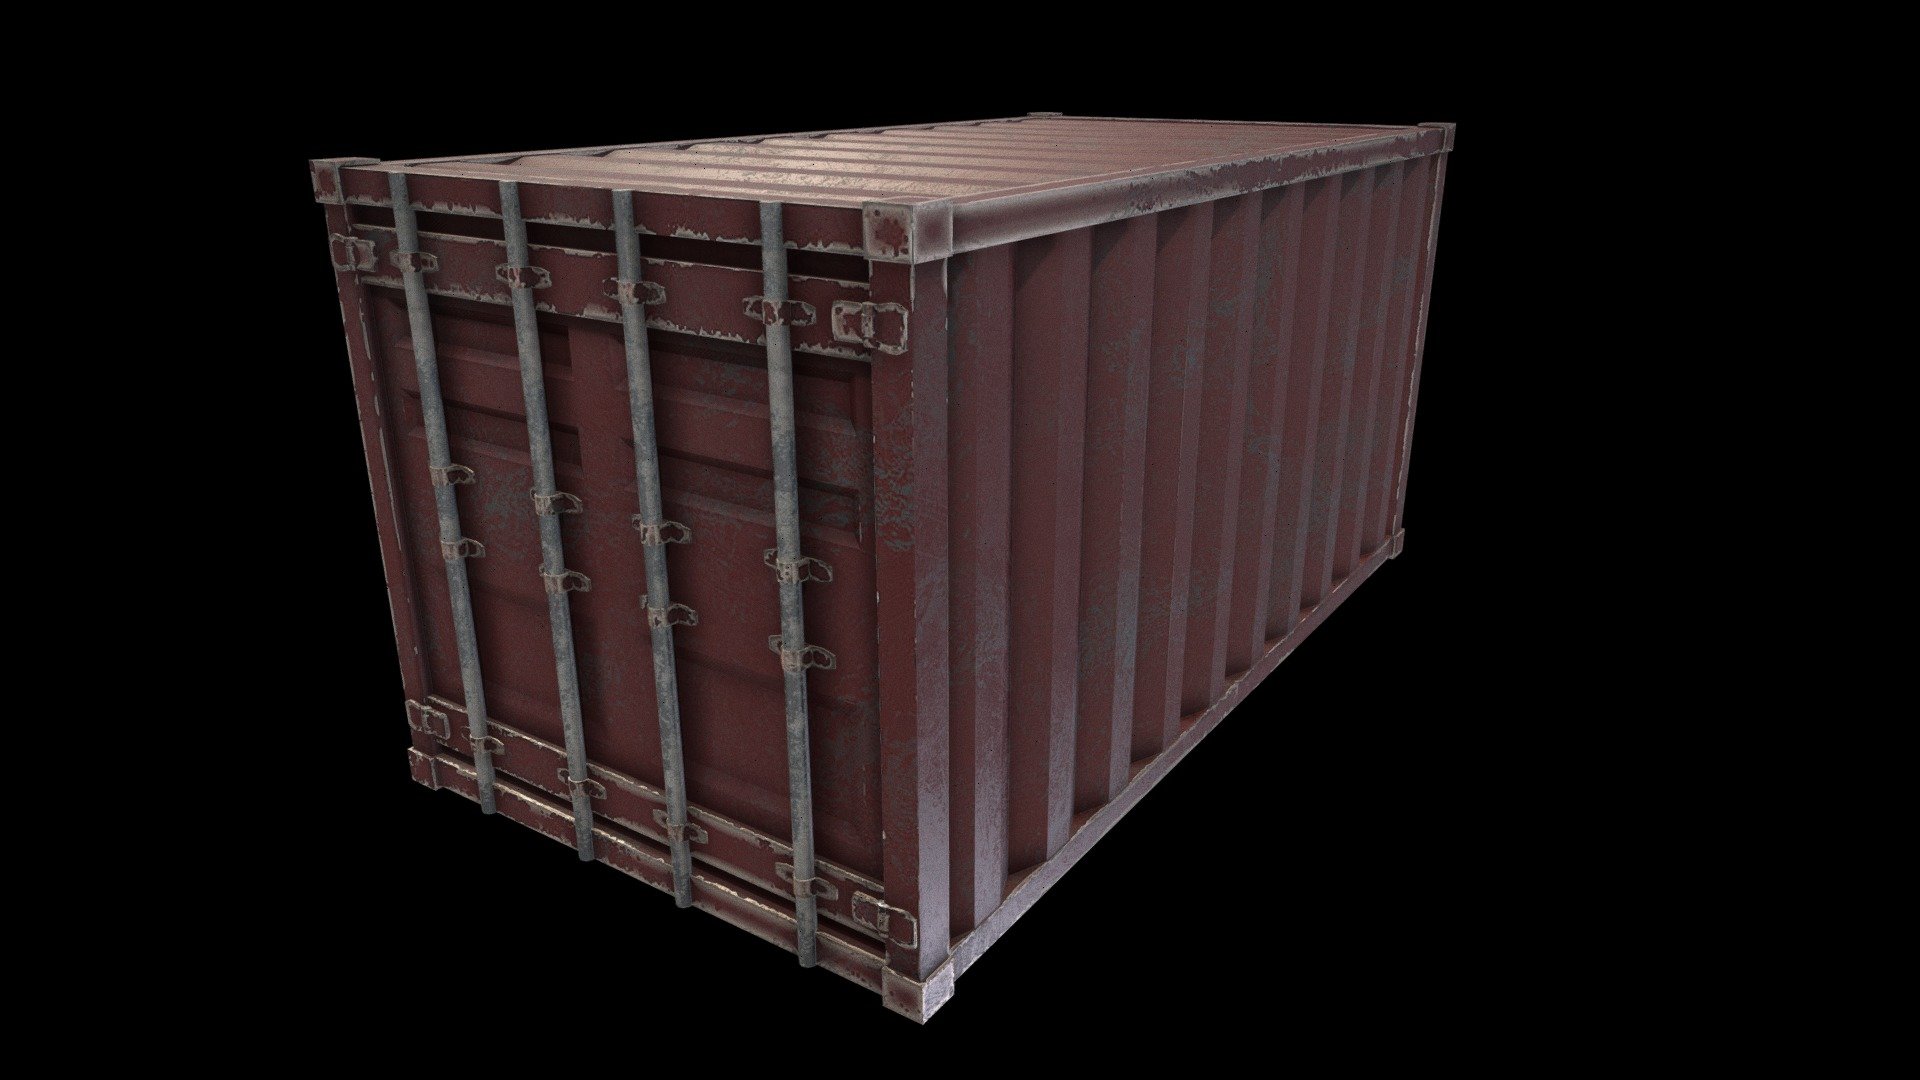 This is a Shipping container I created in Maya and then textured in Substance! Feedback is more than appricated 3d model